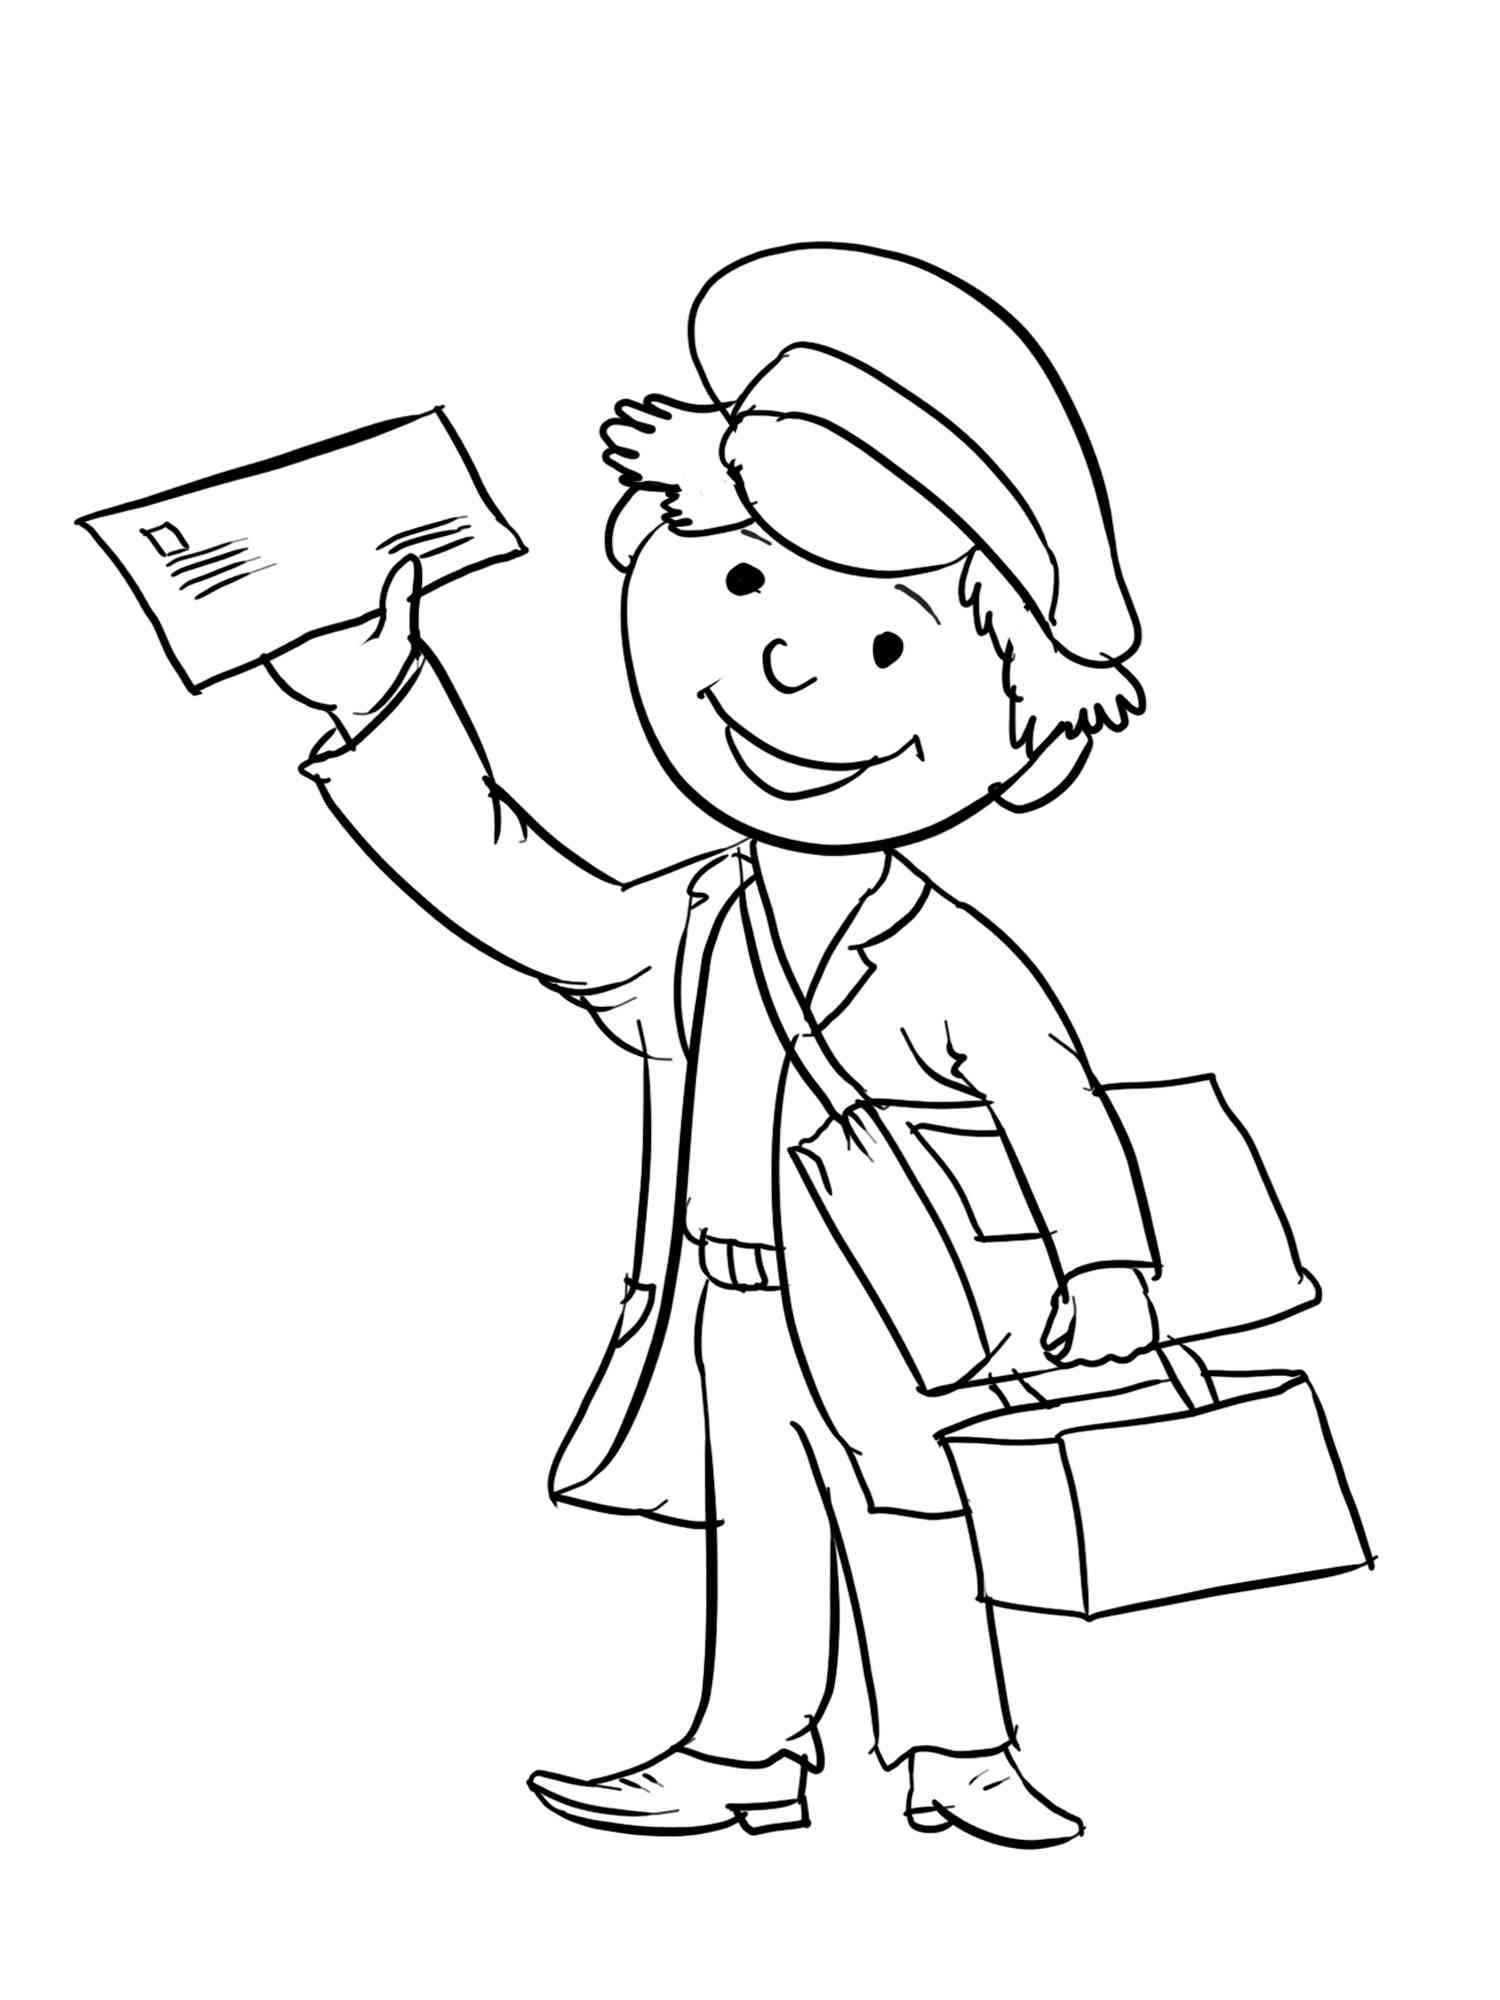 Free Postman coloring pages. Download and print Melonheadz coloring pages